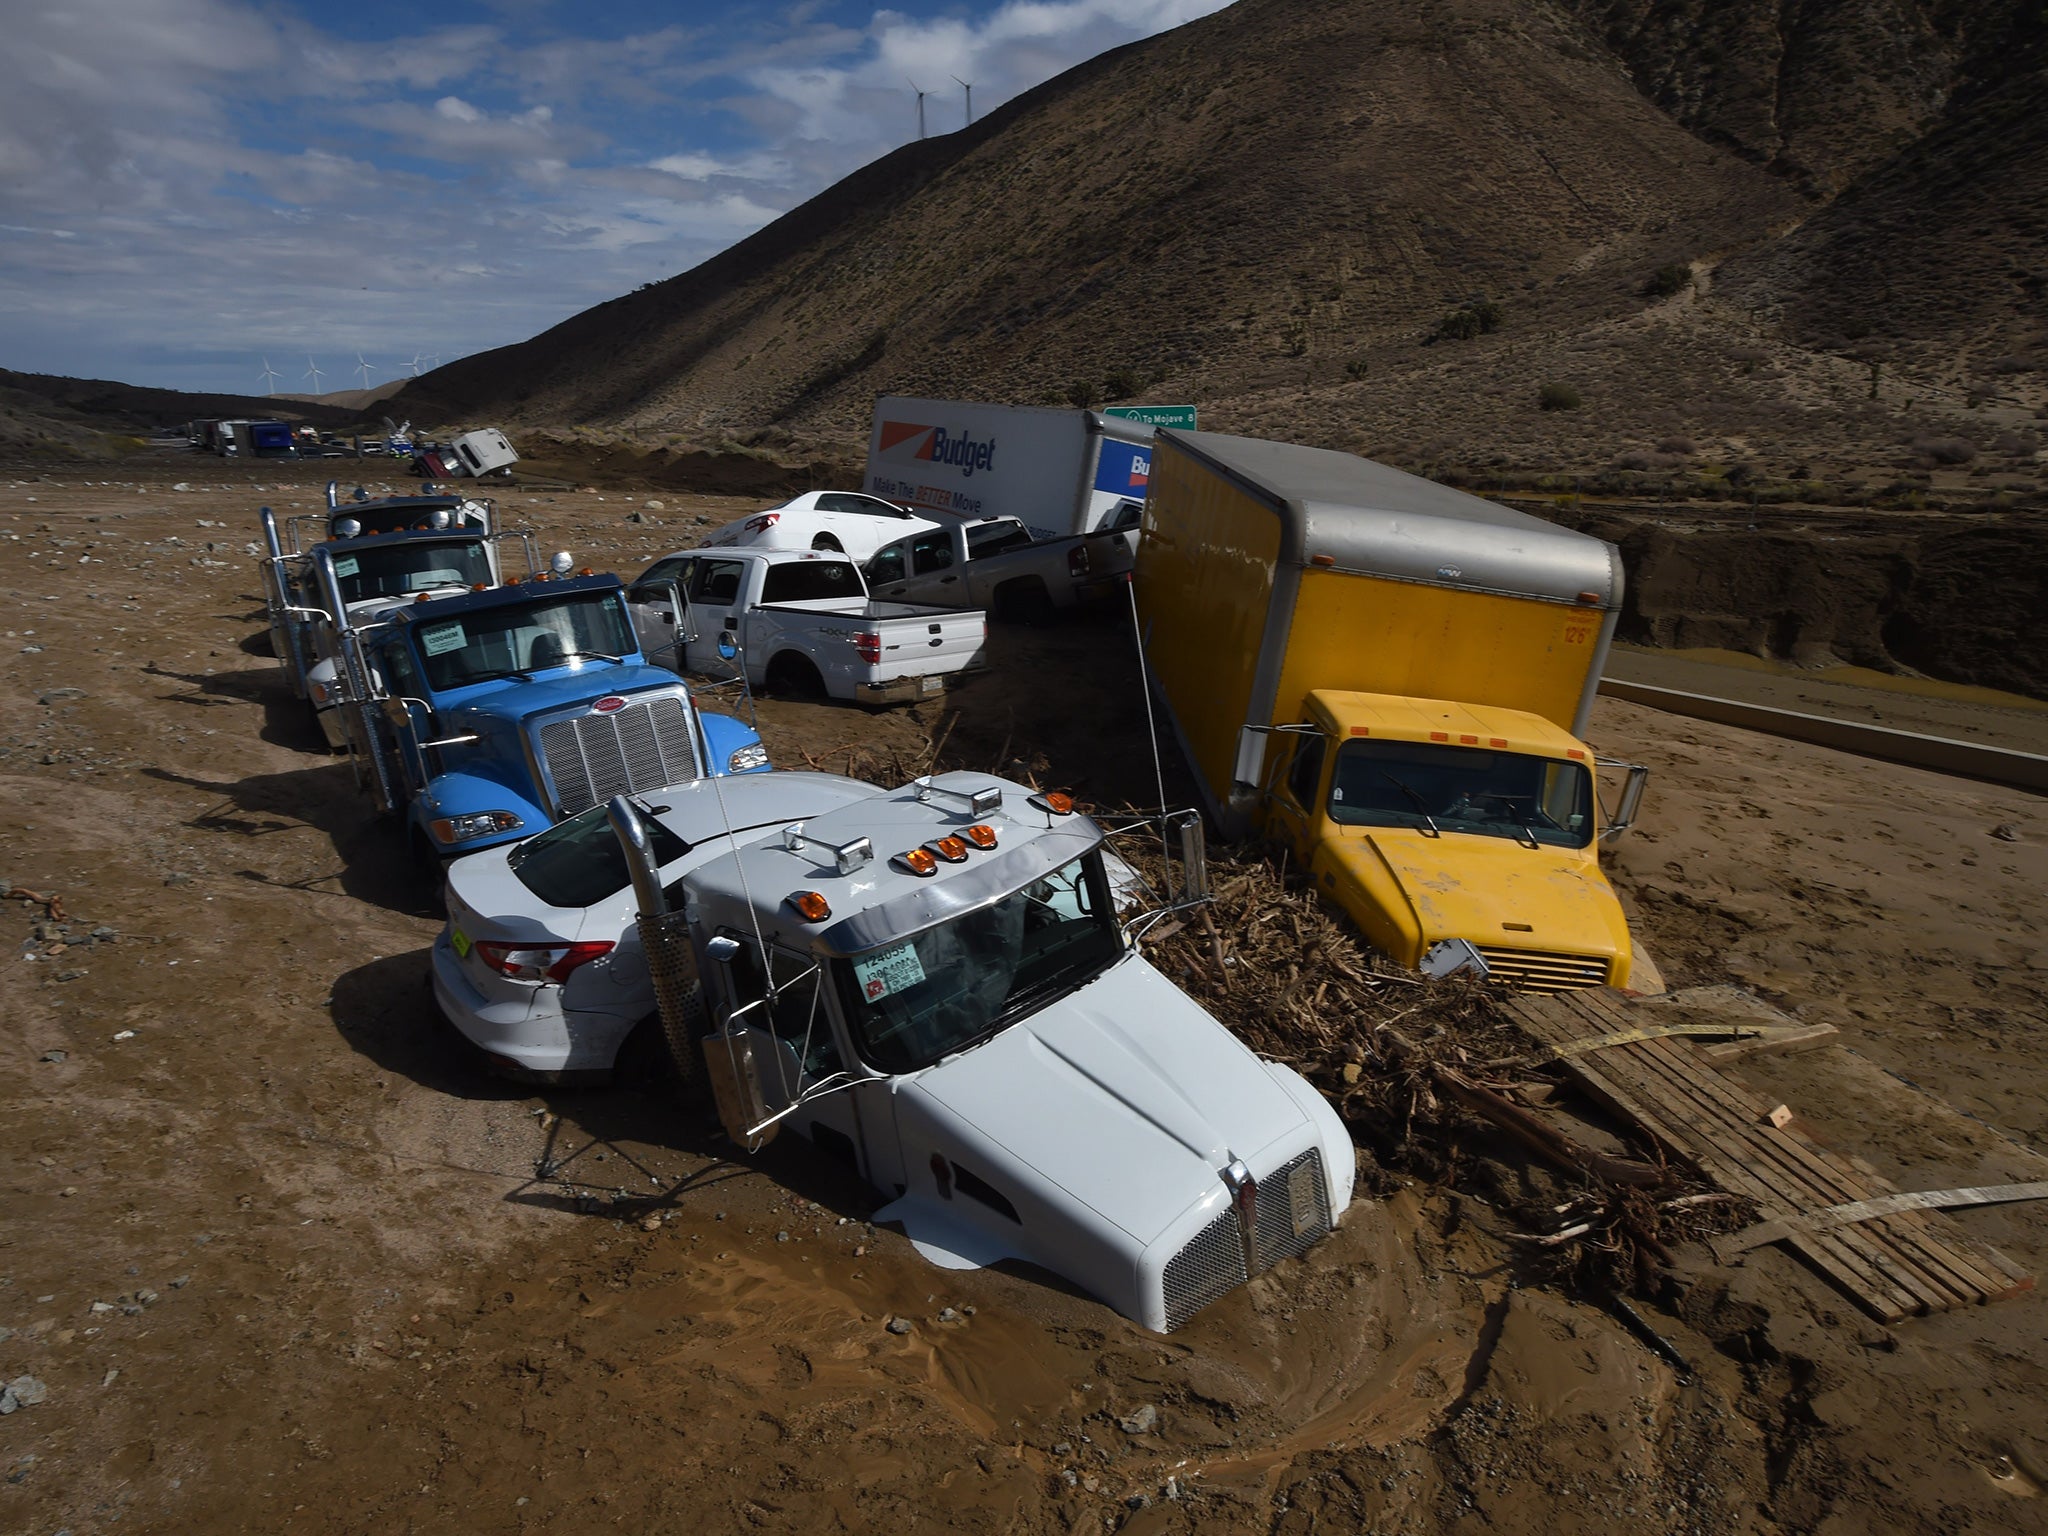 Vehicles are stuck on a road after being trapped by a mudslide on California Highway 58 in Mojave, California on October 16, 2015